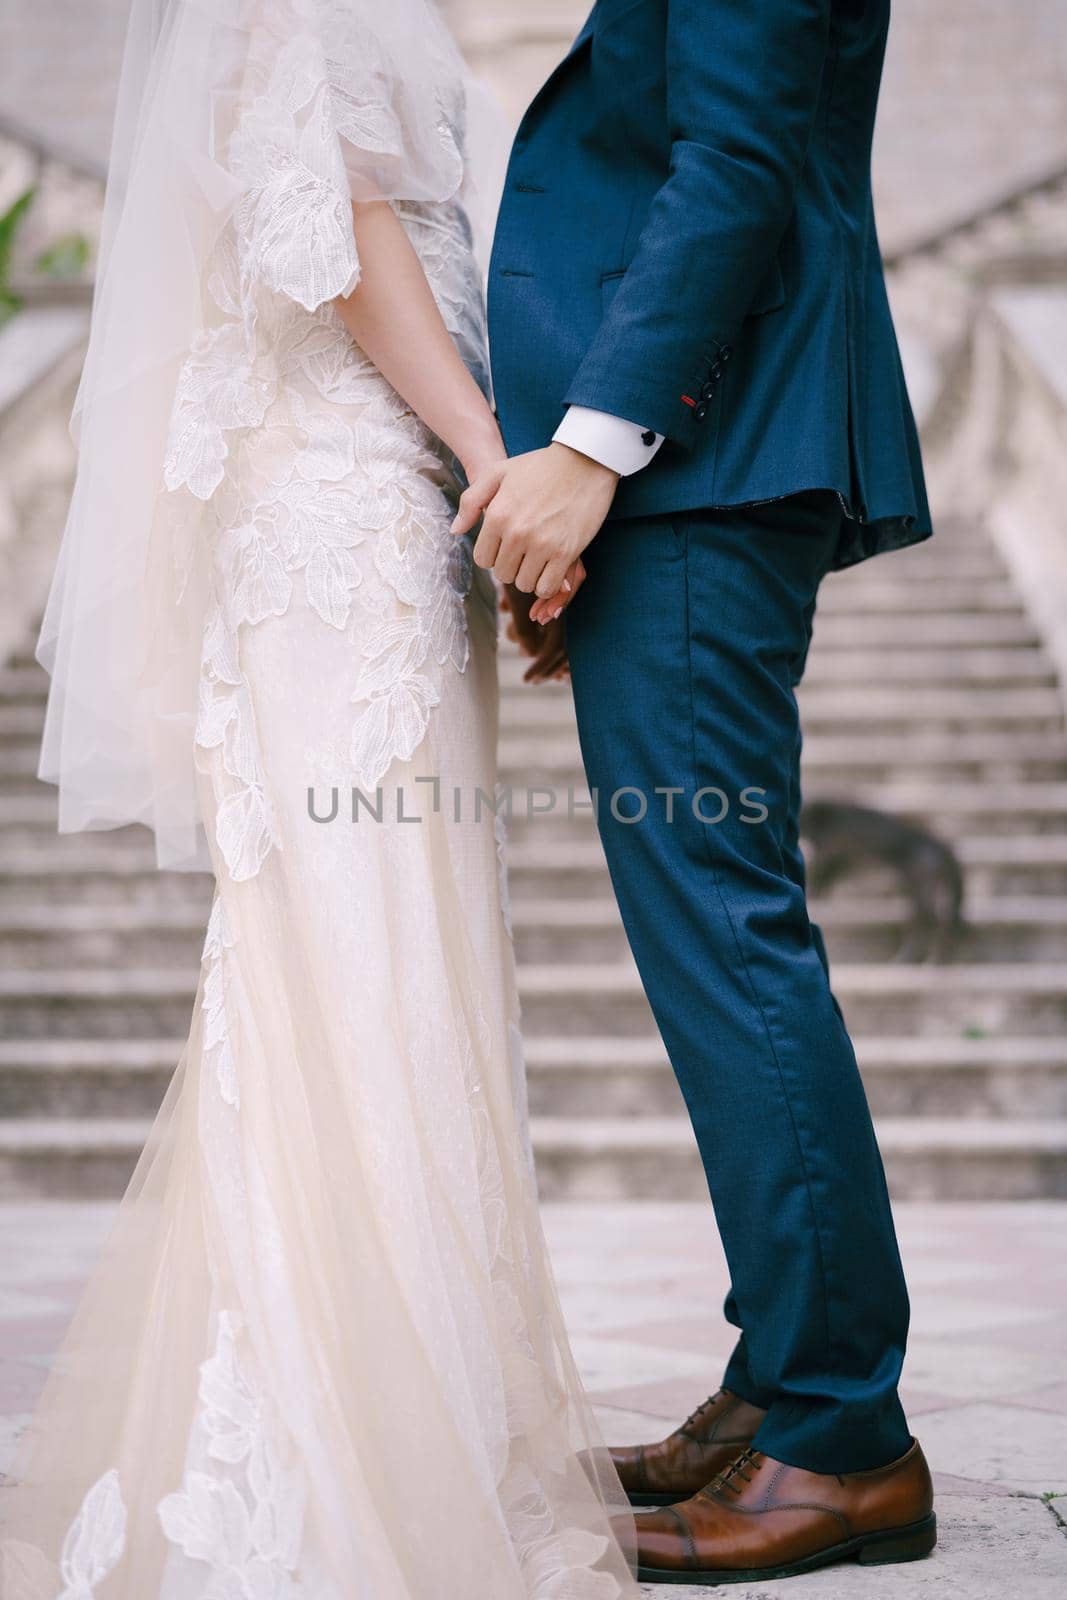 Bride and groom stand holding hands on the stone steps. Close-up by Nadtochiy